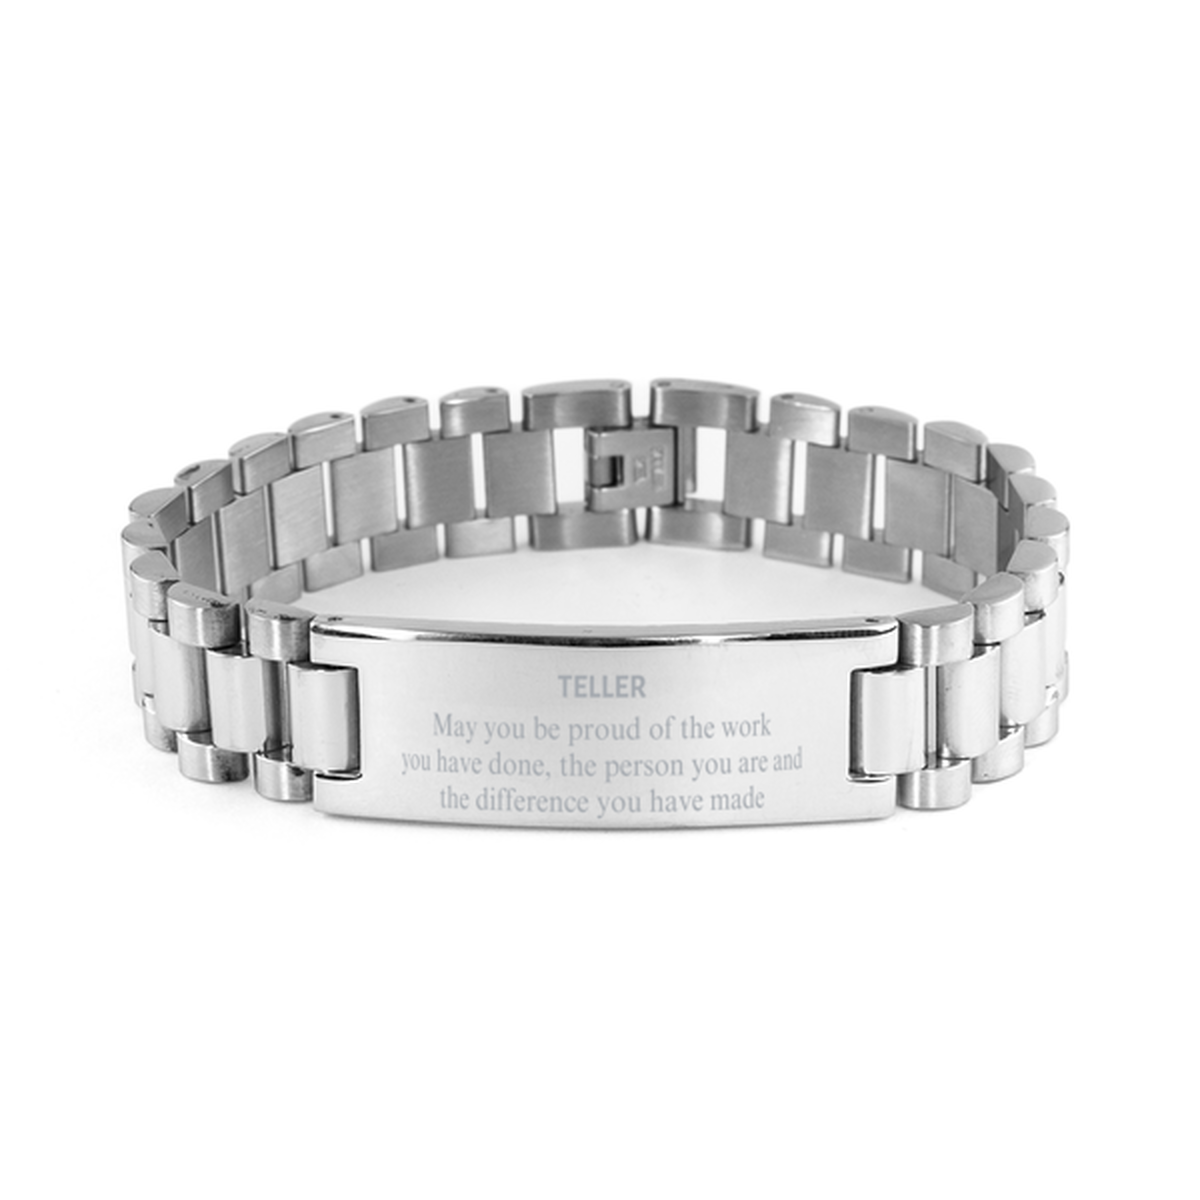 Teller May you be proud of the work you have done, Retirement Teller Ladder Stainless Steel Bracelet for Colleague Appreciation Gifts Amazing for Teller